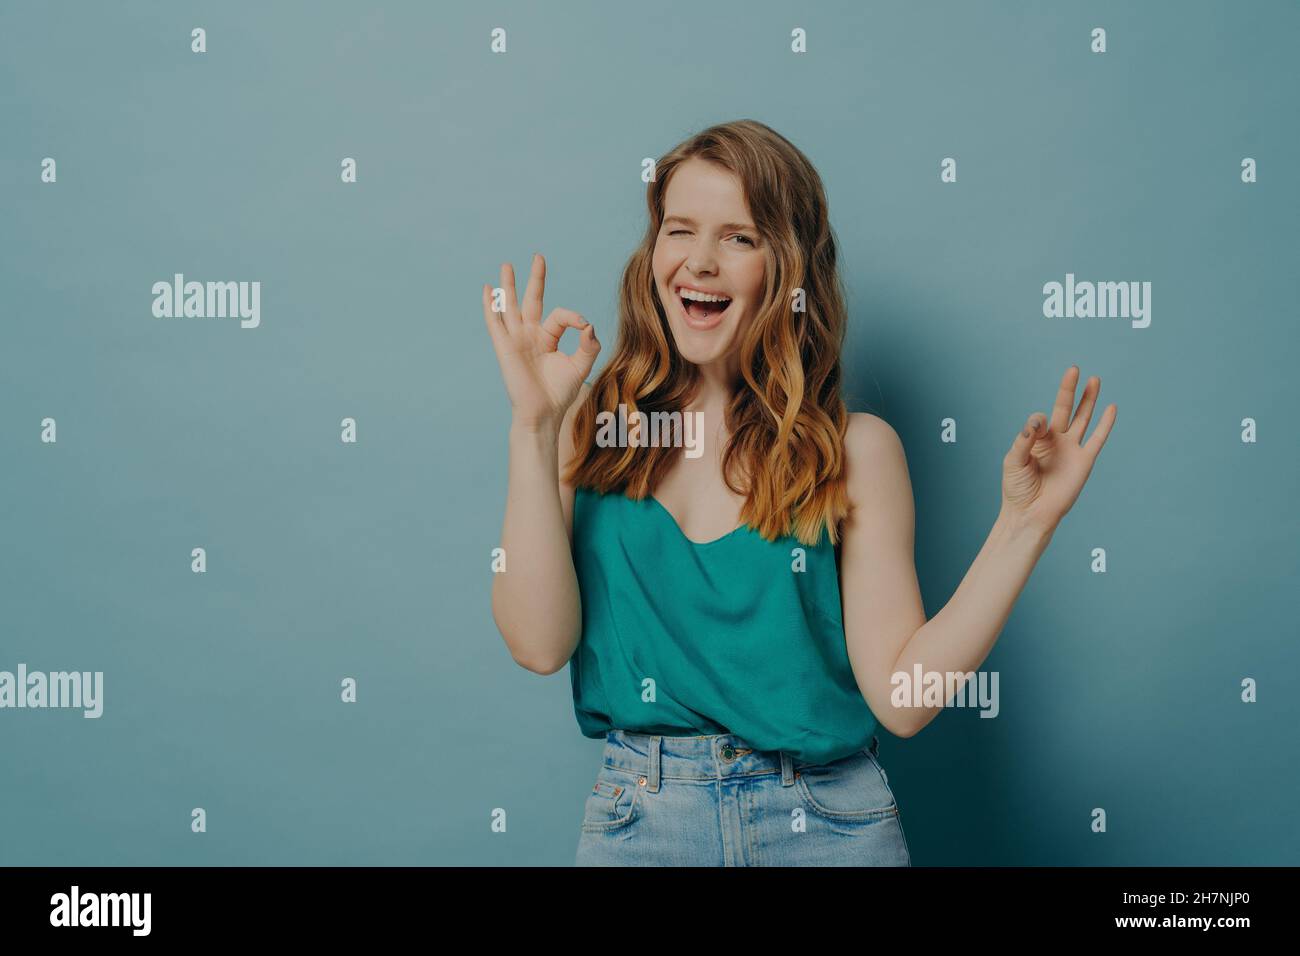 Charming funny girl shows OK sign with hands, winking and looking at camera with big smile Stock Photo